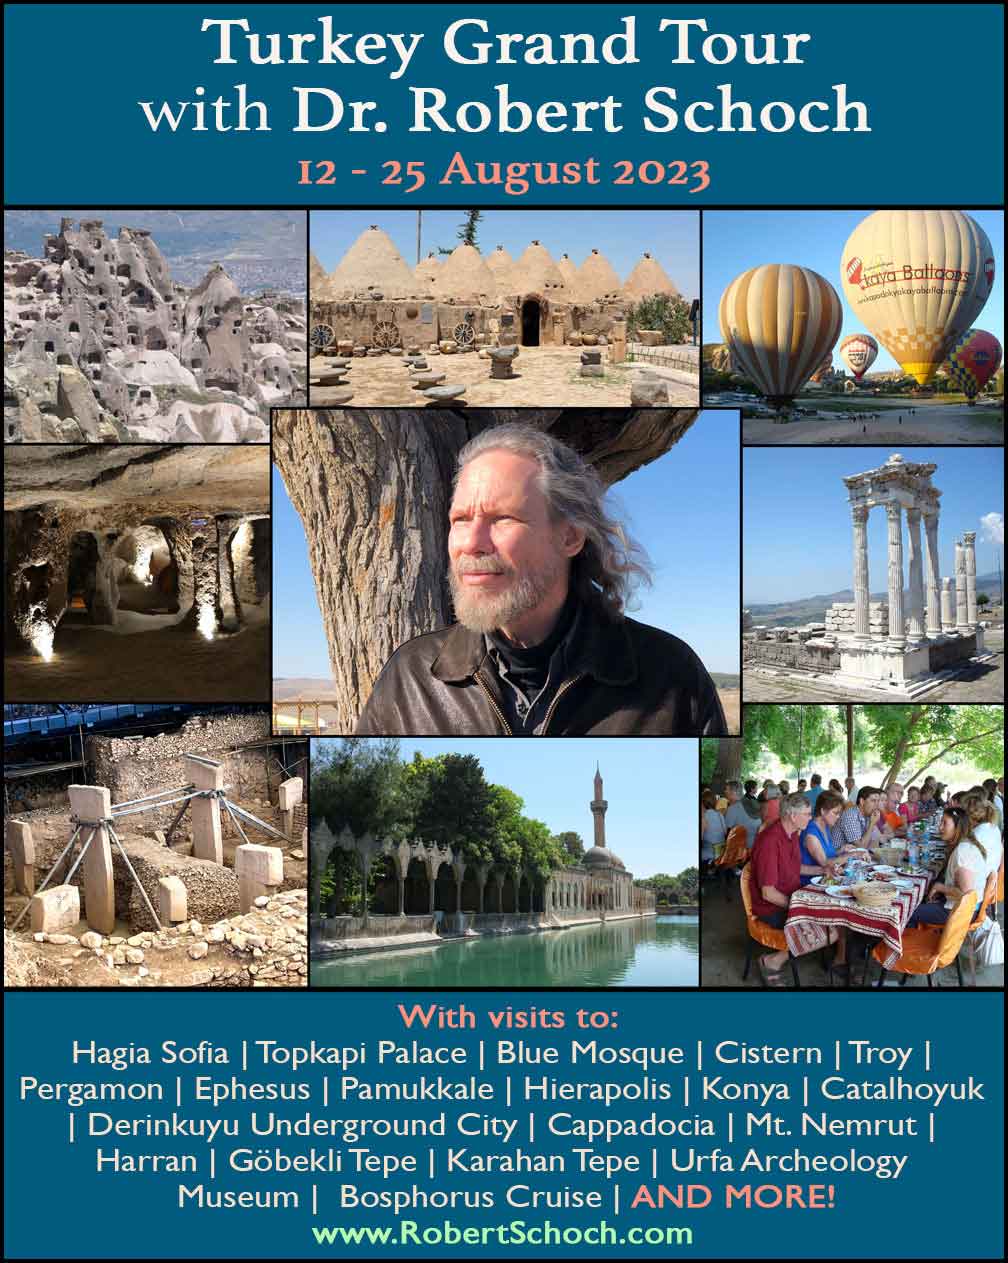 Advertisement for Egypt tour in June of 2019 with Robert Schoch